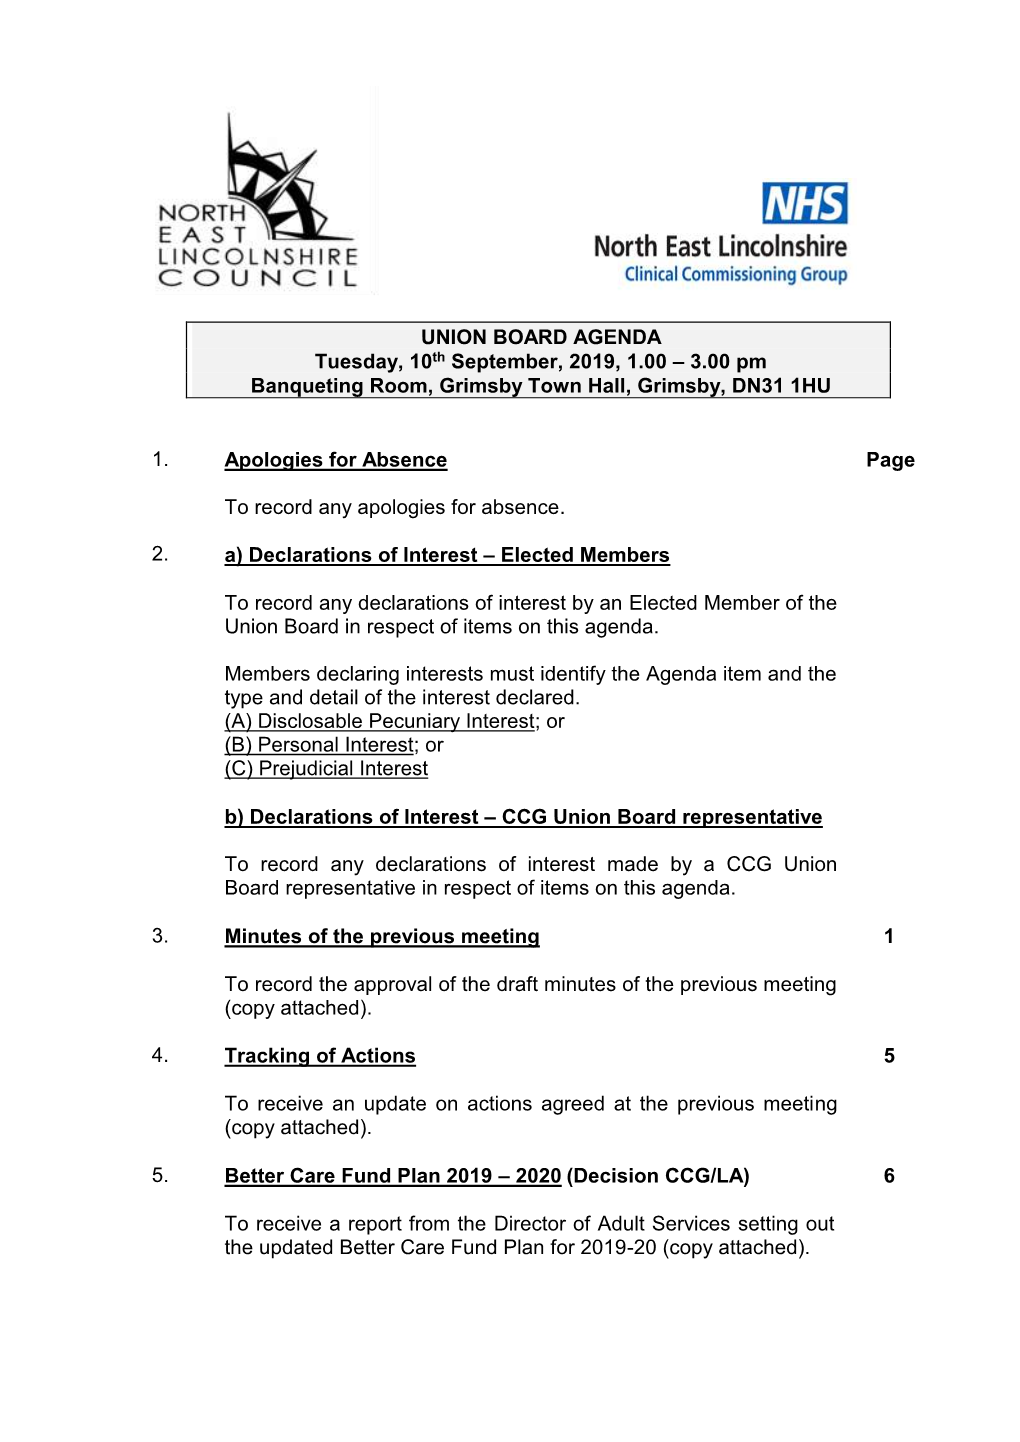 UNION BOARD AGENDA Tuesday, 10Th September, 2019, 1.00 – 3.00 Pm Banqueting Room, Grimsby Town Hall, Grimsby, DN31 1HU